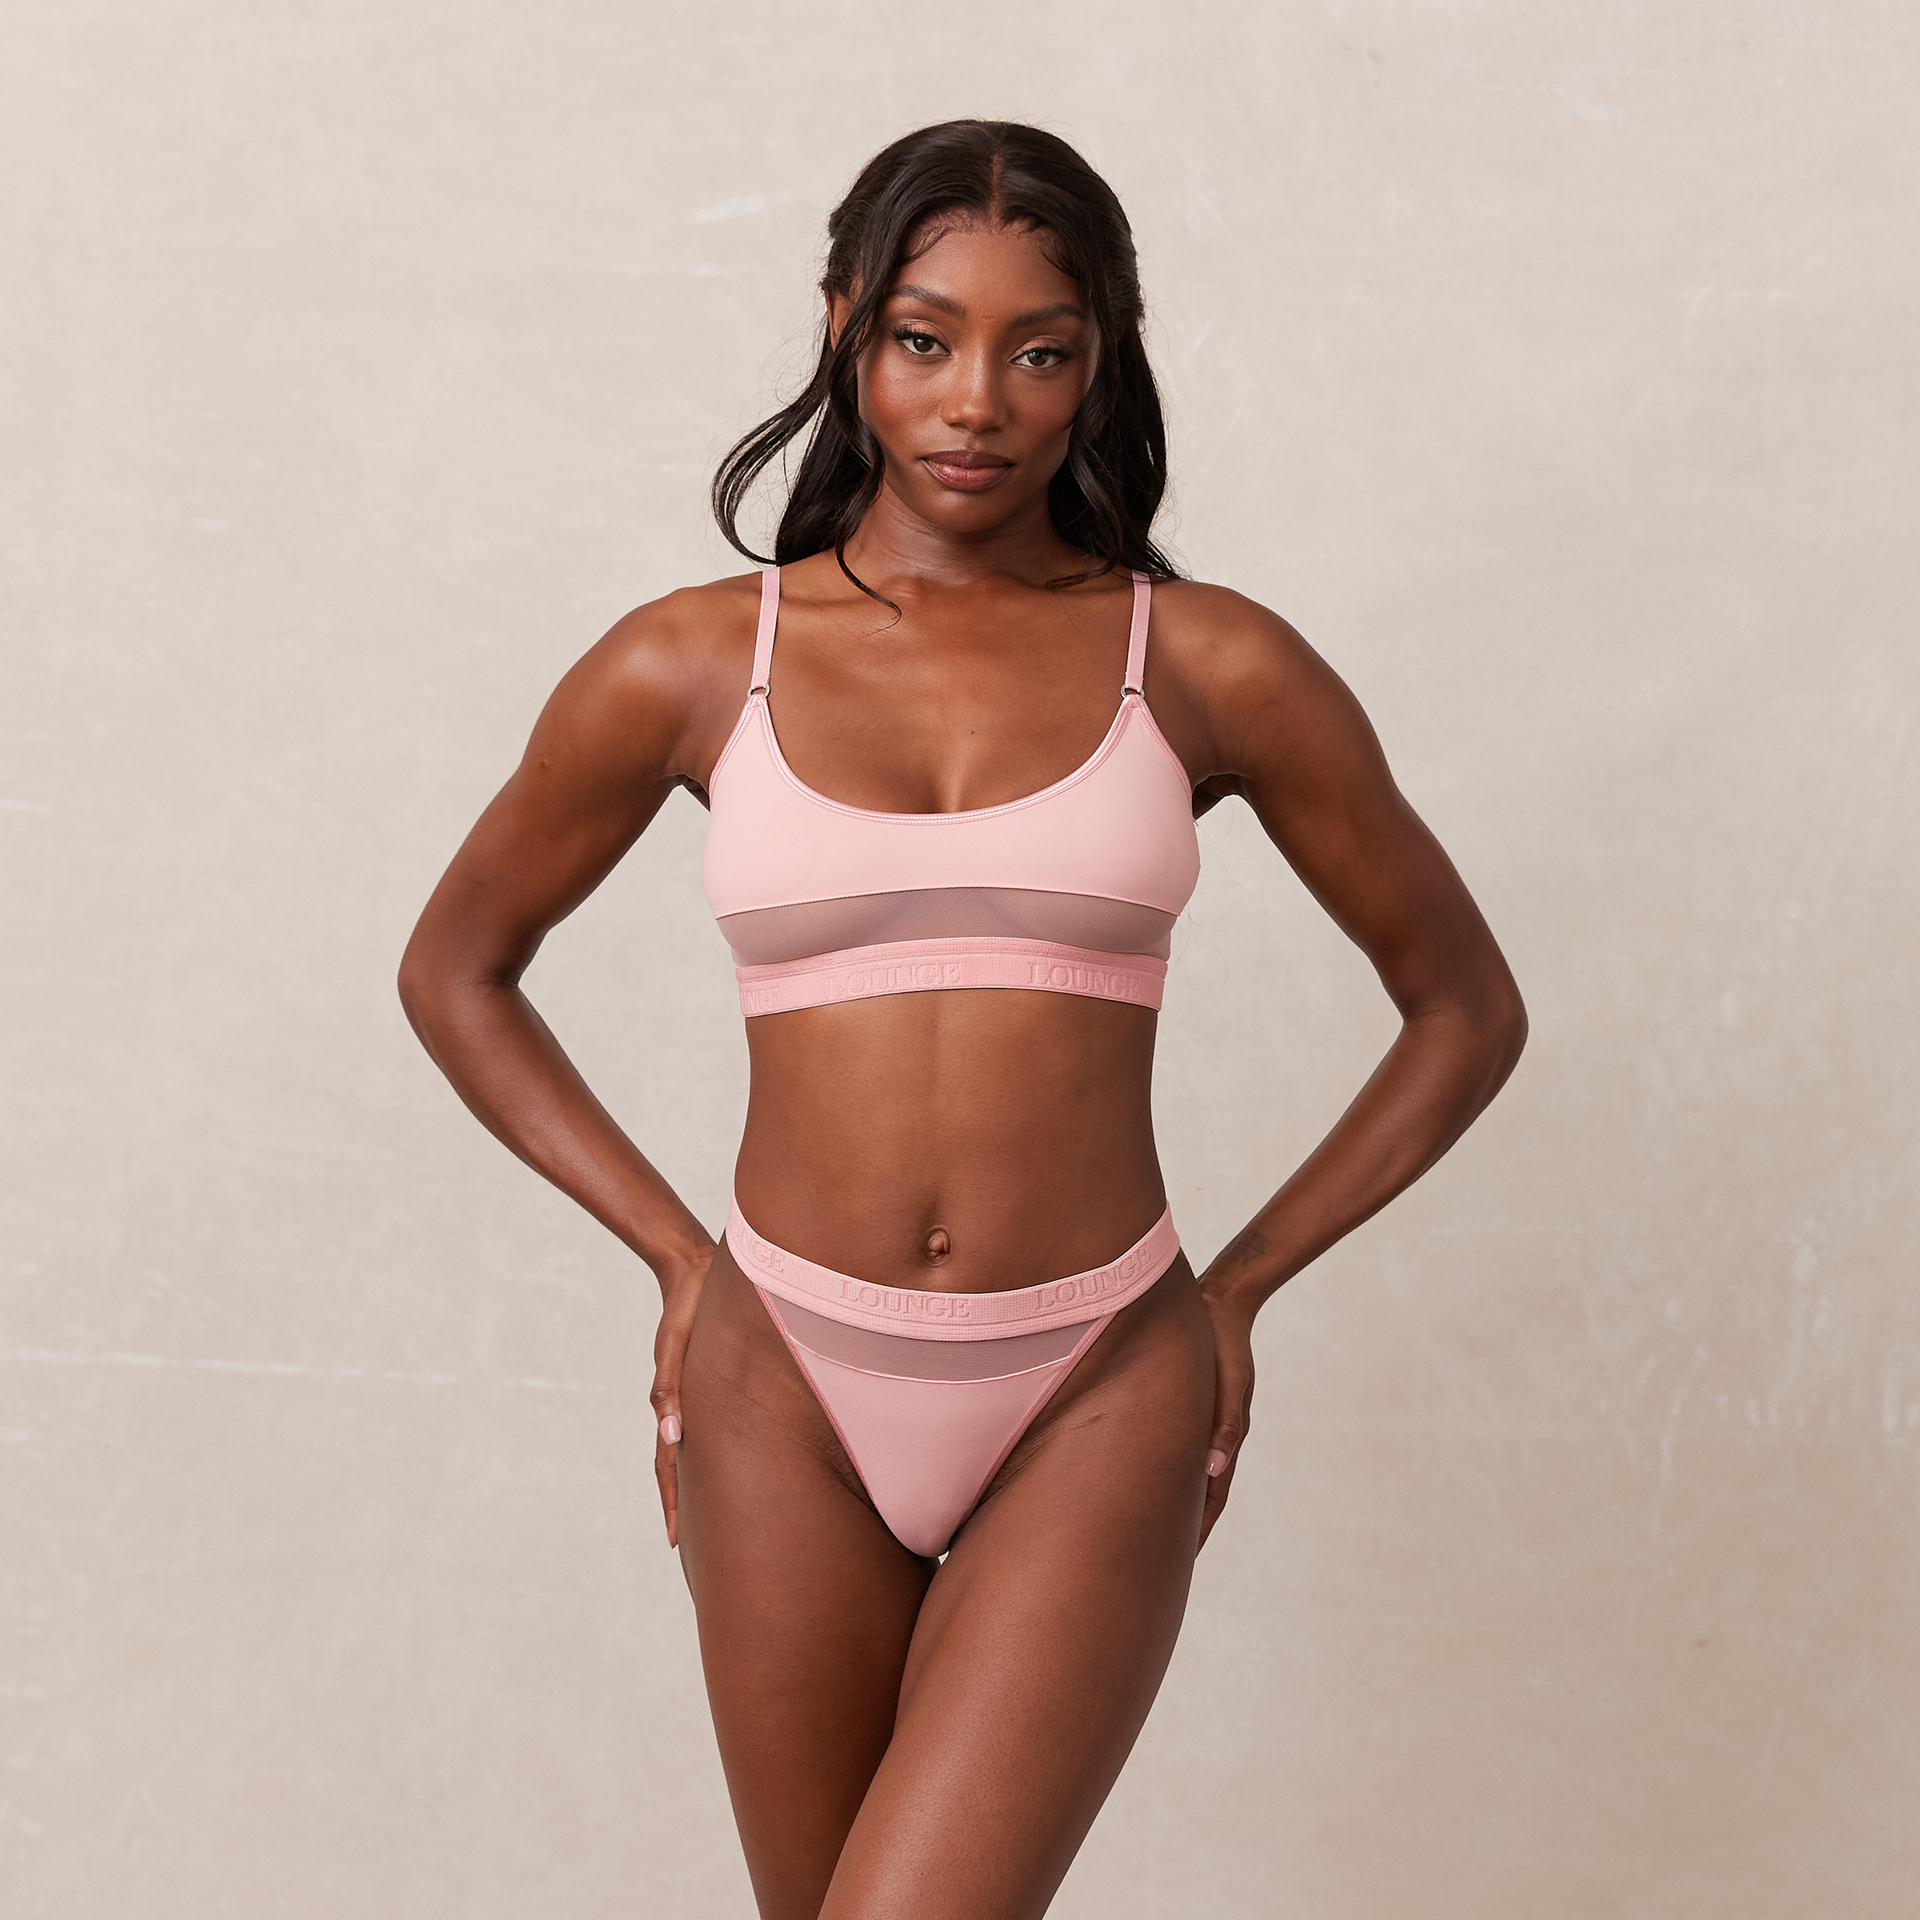 Plain Ribbed Lingerie Bra Top and Thong Set in Hot Pink - Retro